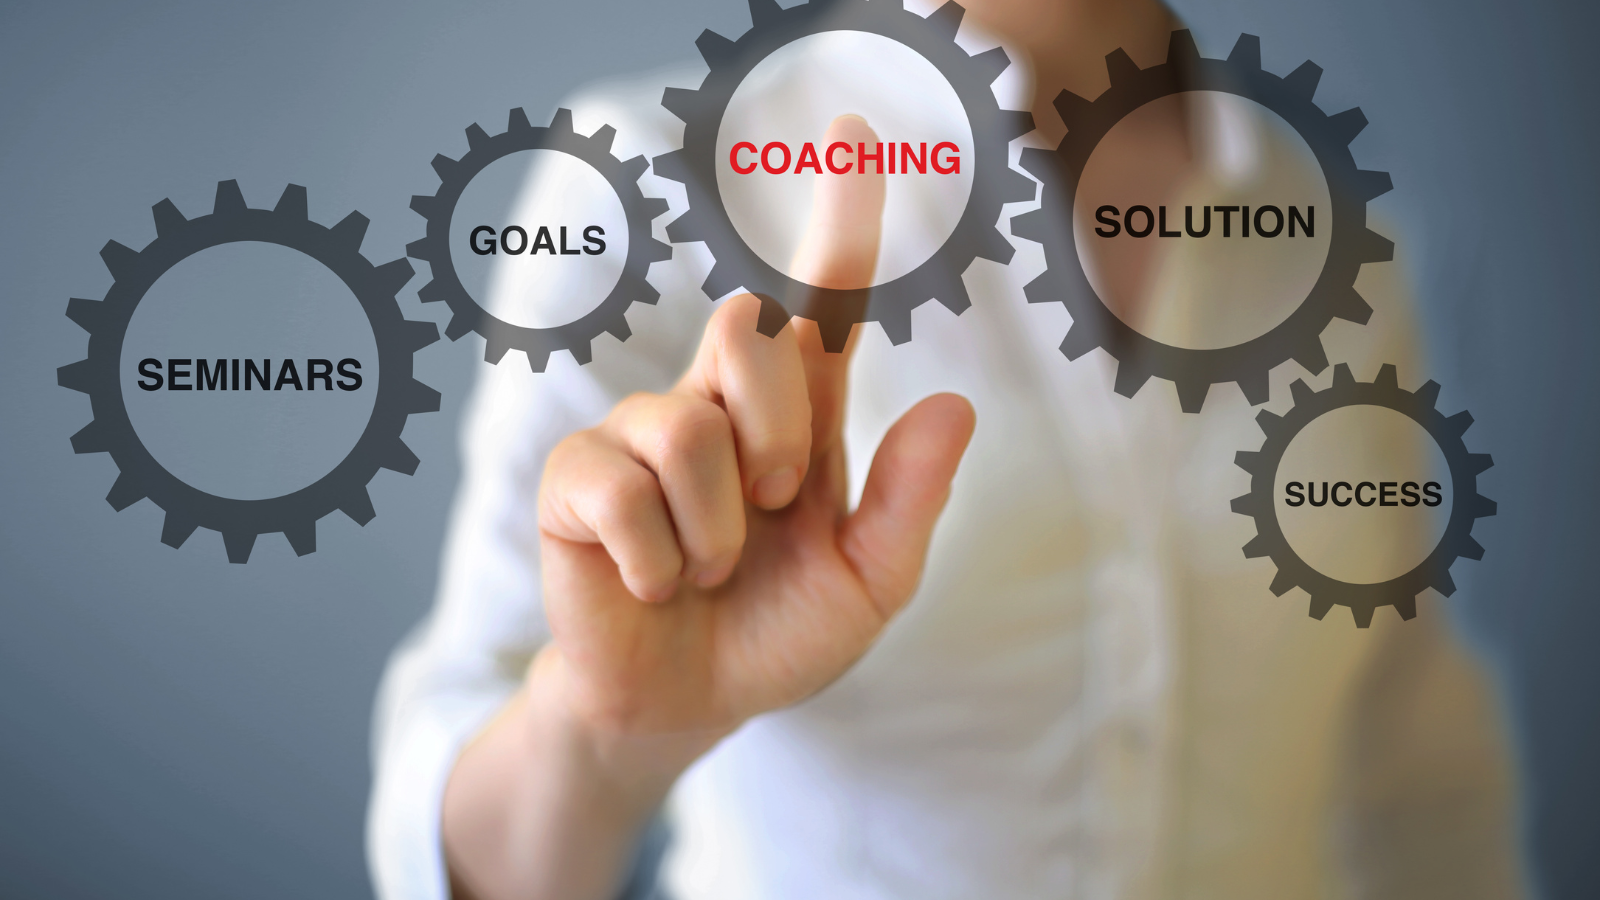 5 Results You Can Expect From Career Coaching